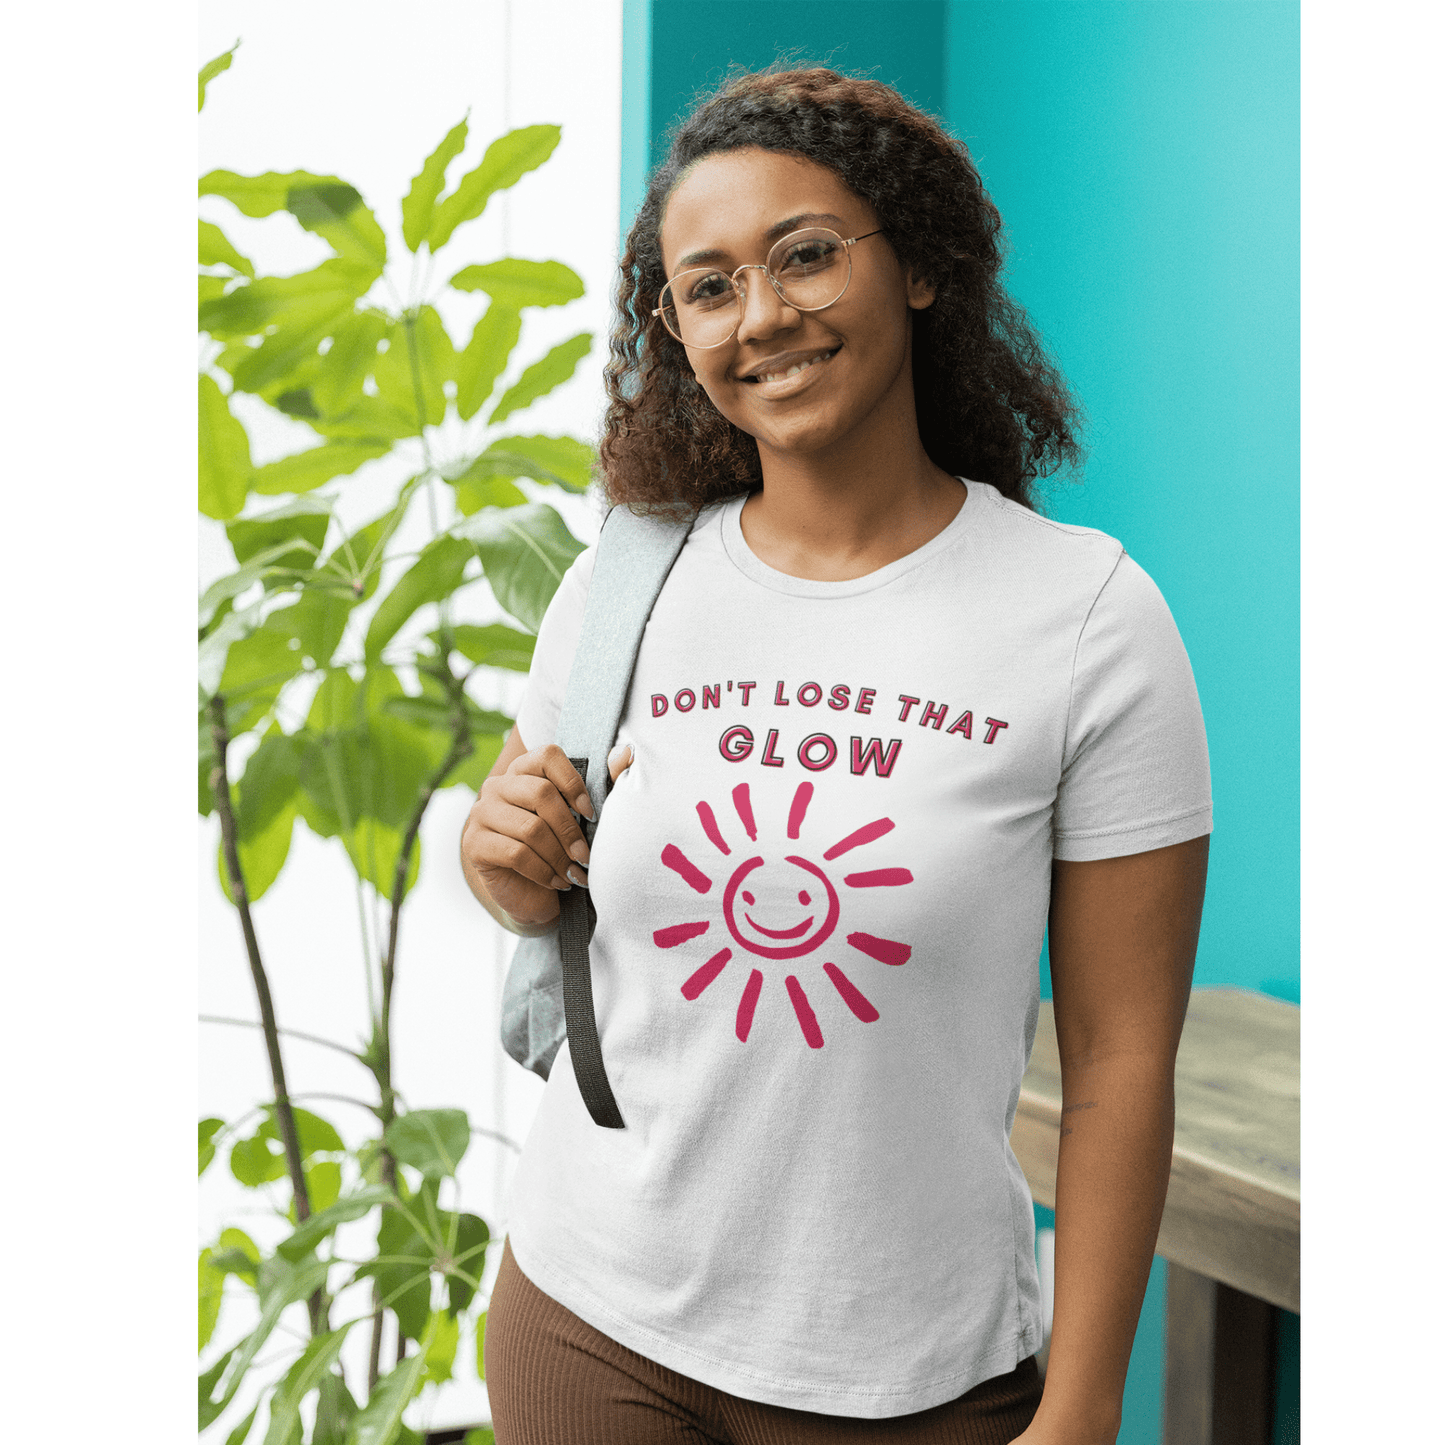 Don't Lose that Glow(Graphic Fuchsia Text with Smiling Sun) Unisex Jersey Short Sleeve Tee - Style: Bella+Canvas 3001